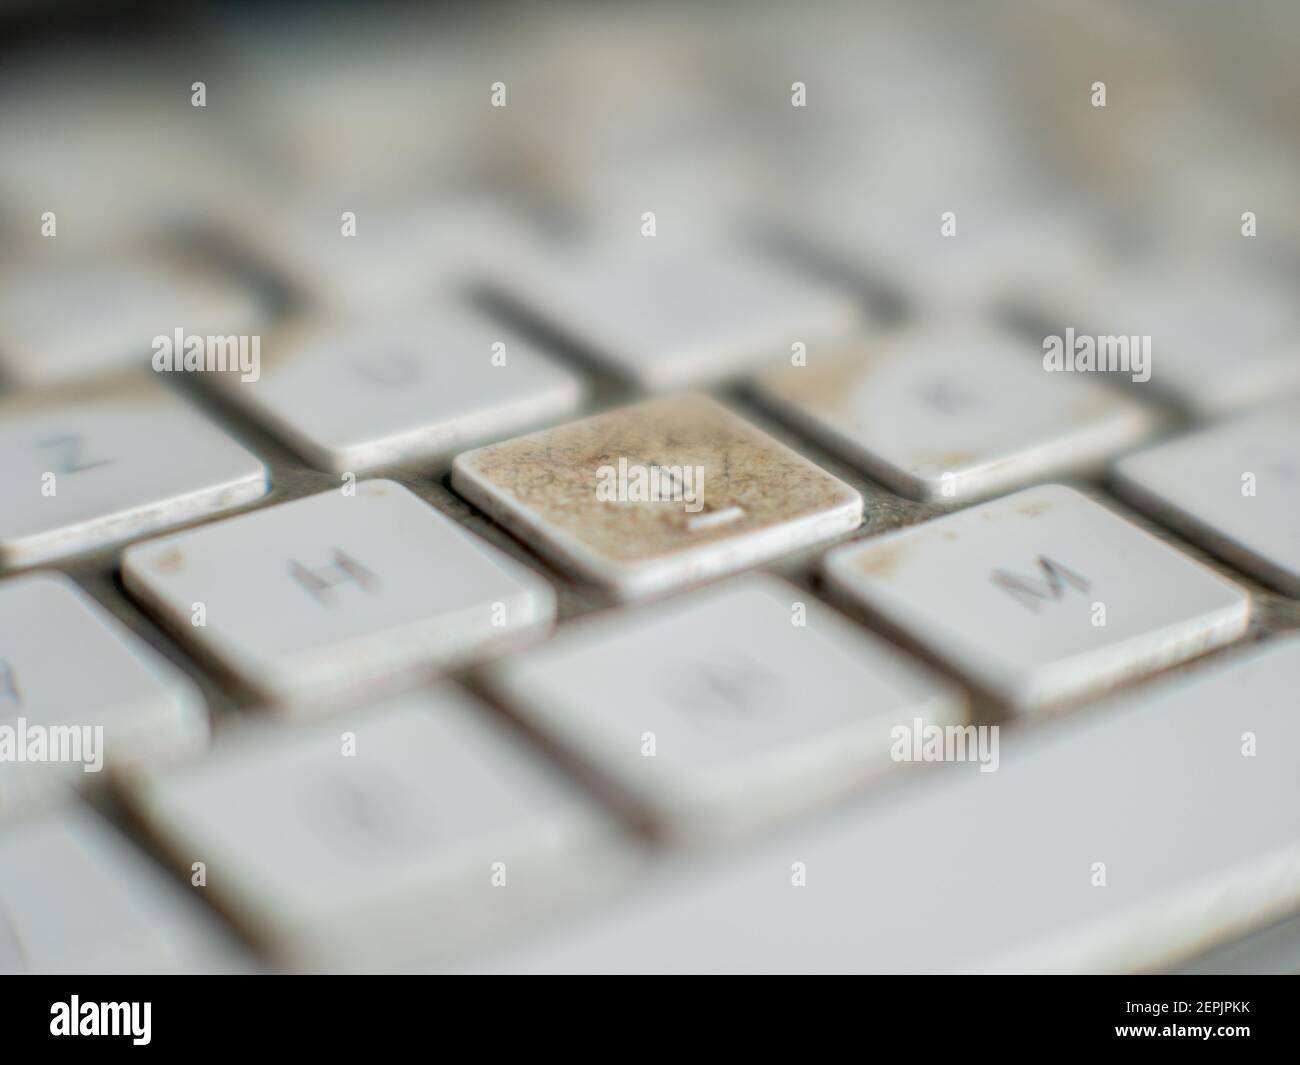 Very dirty white wireless computer keyboard with button J in focus Stock Photo